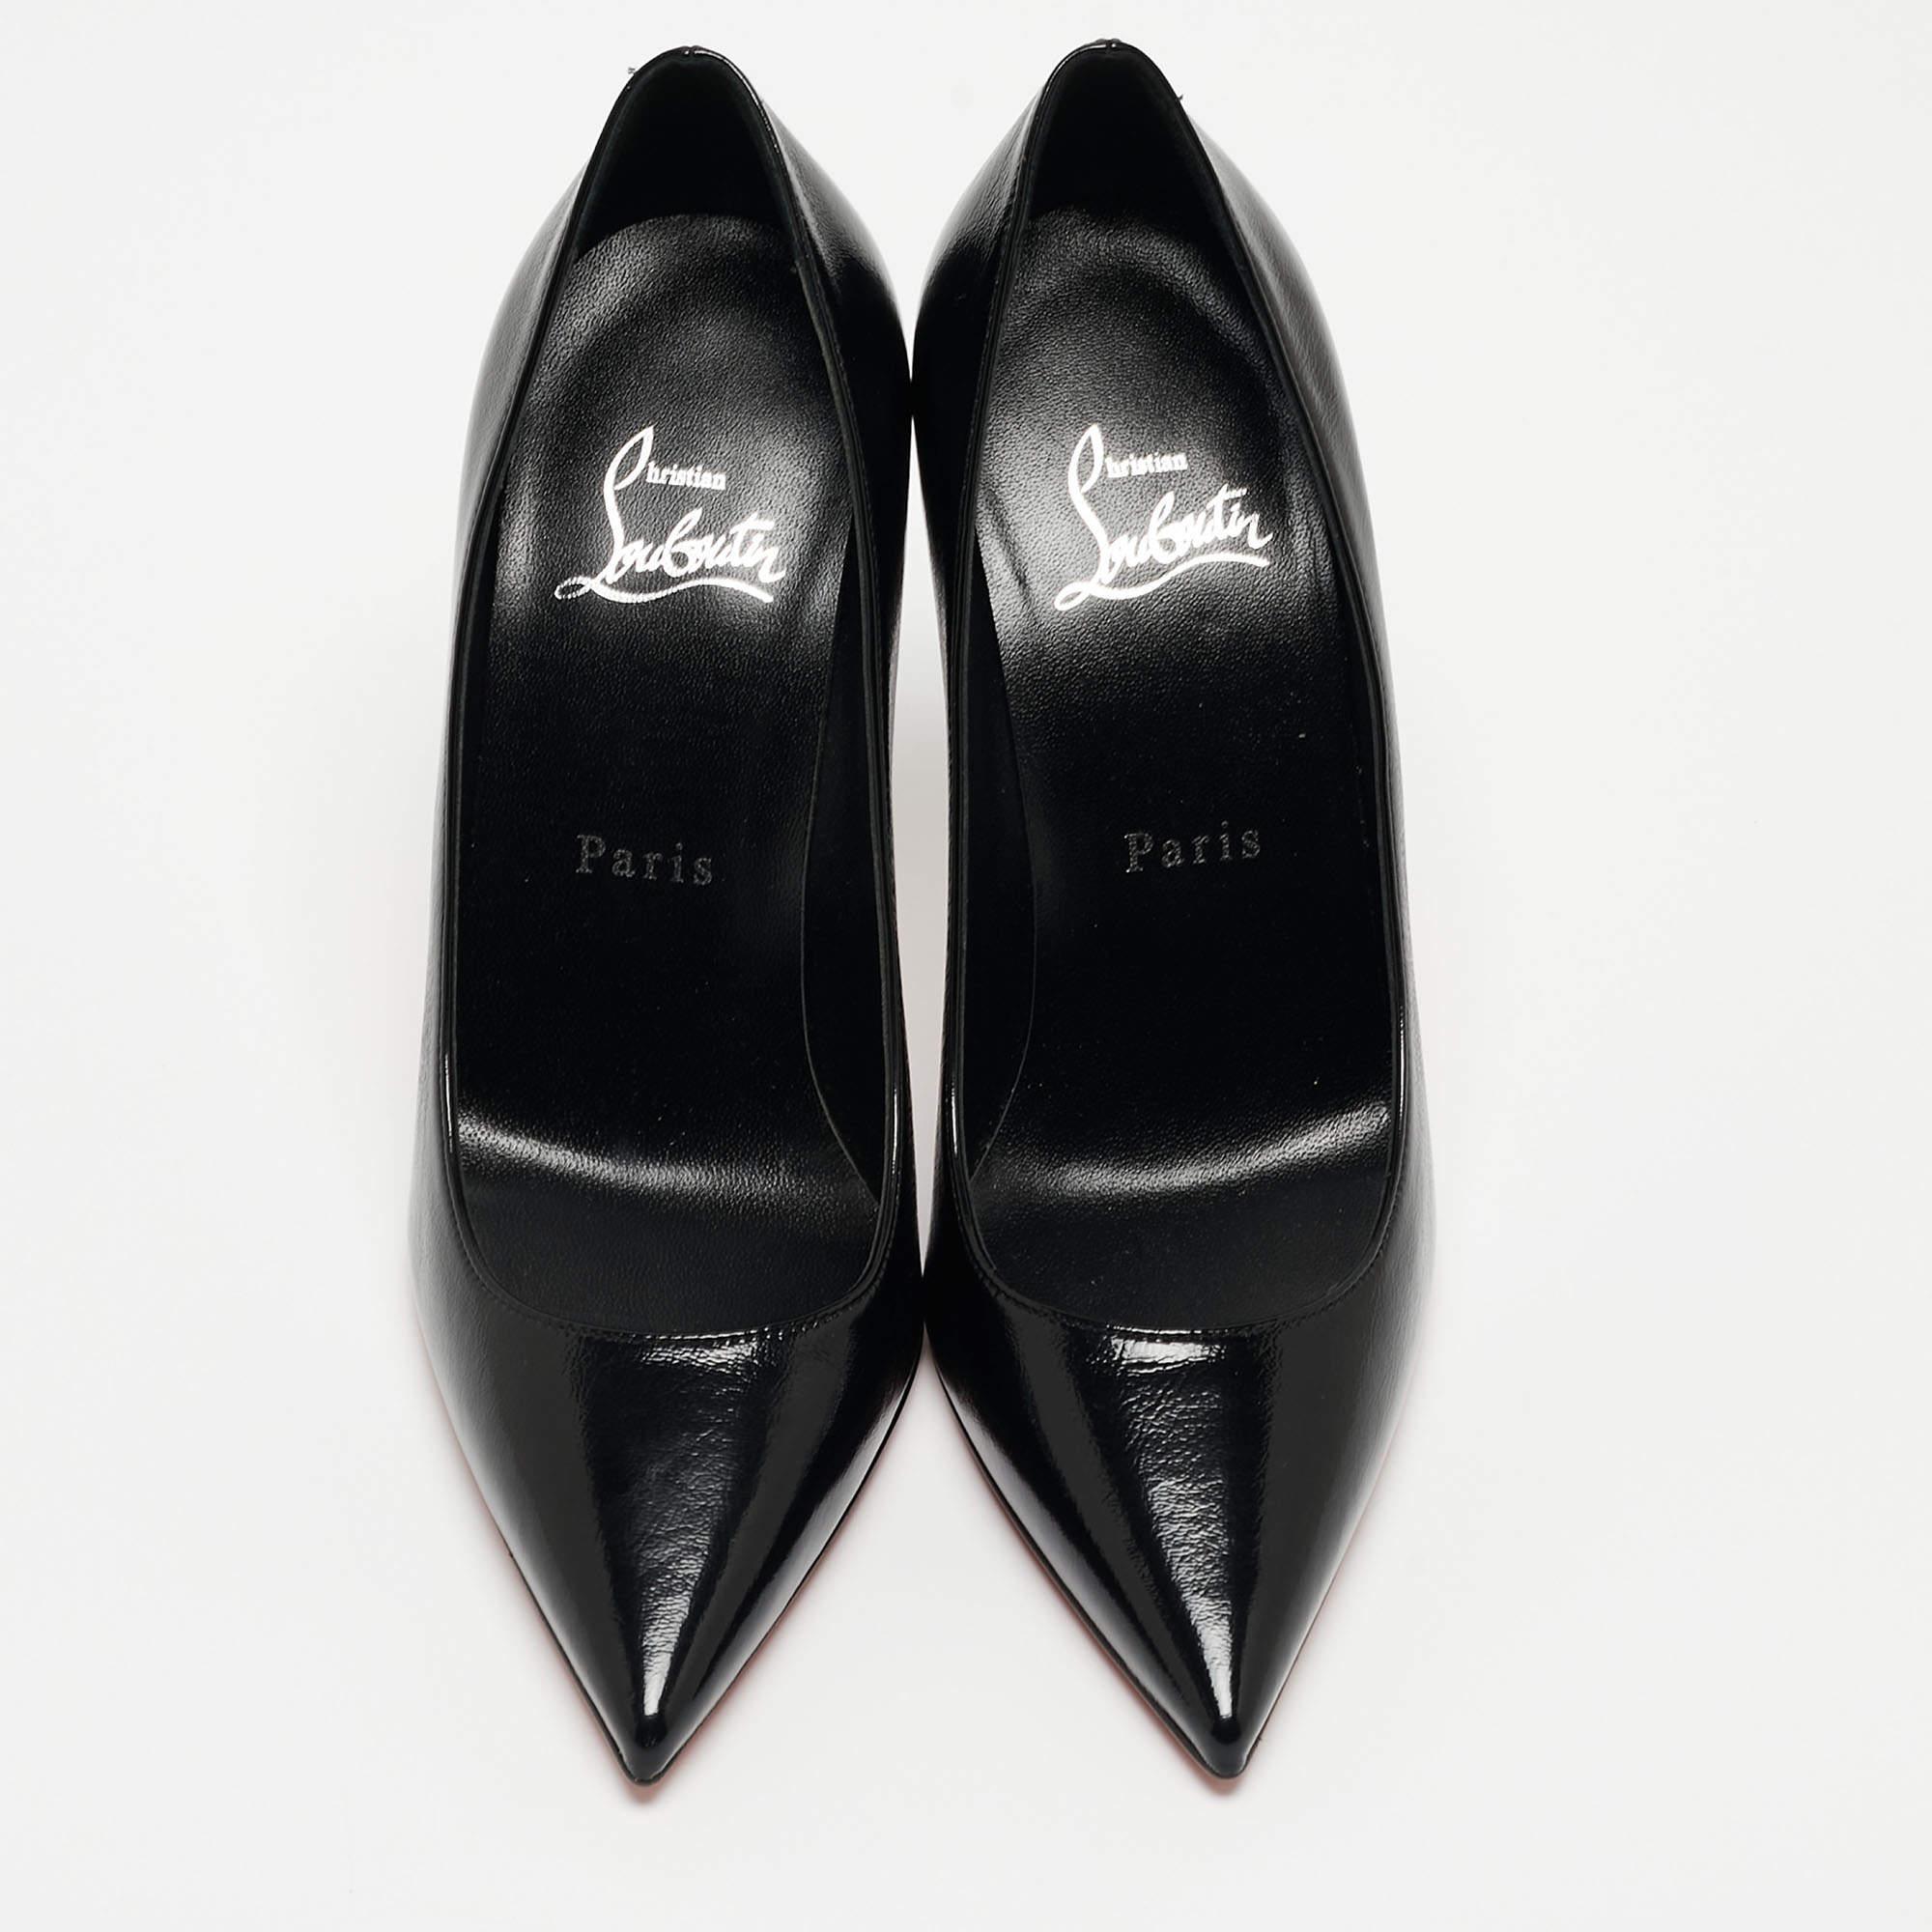 Named after English model Kate Moss, this pair of Christian Louboutin So Kate pumps reflects elegance and sophistication in every step. Proving the brand's expertise in the art of stiletto making, it has been diligently crafted from black patent